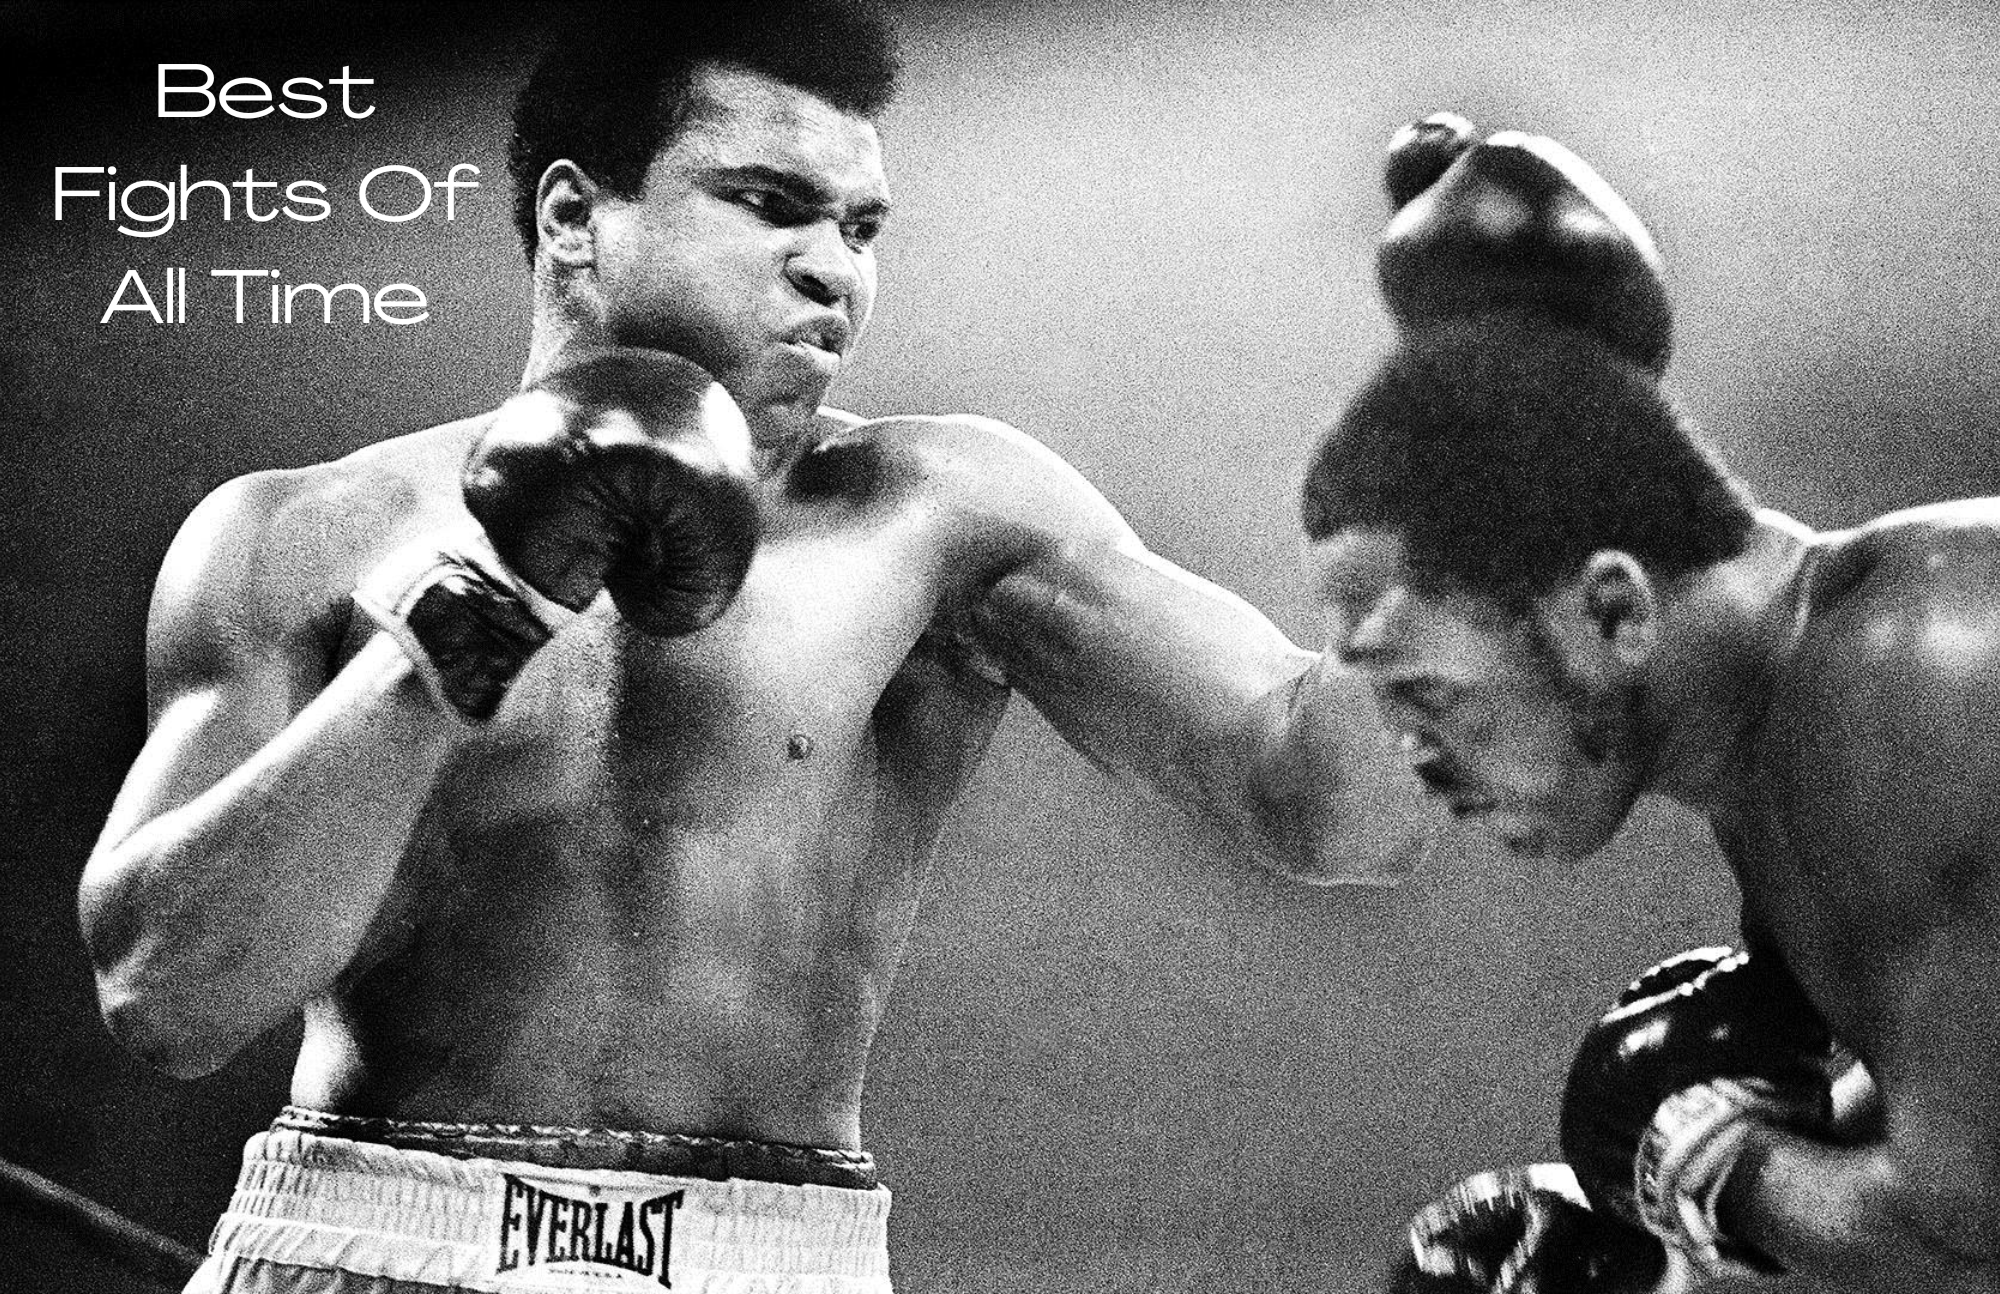 Best Fights Of All Time - Four Surprising And Brutal Boxing Matches In History